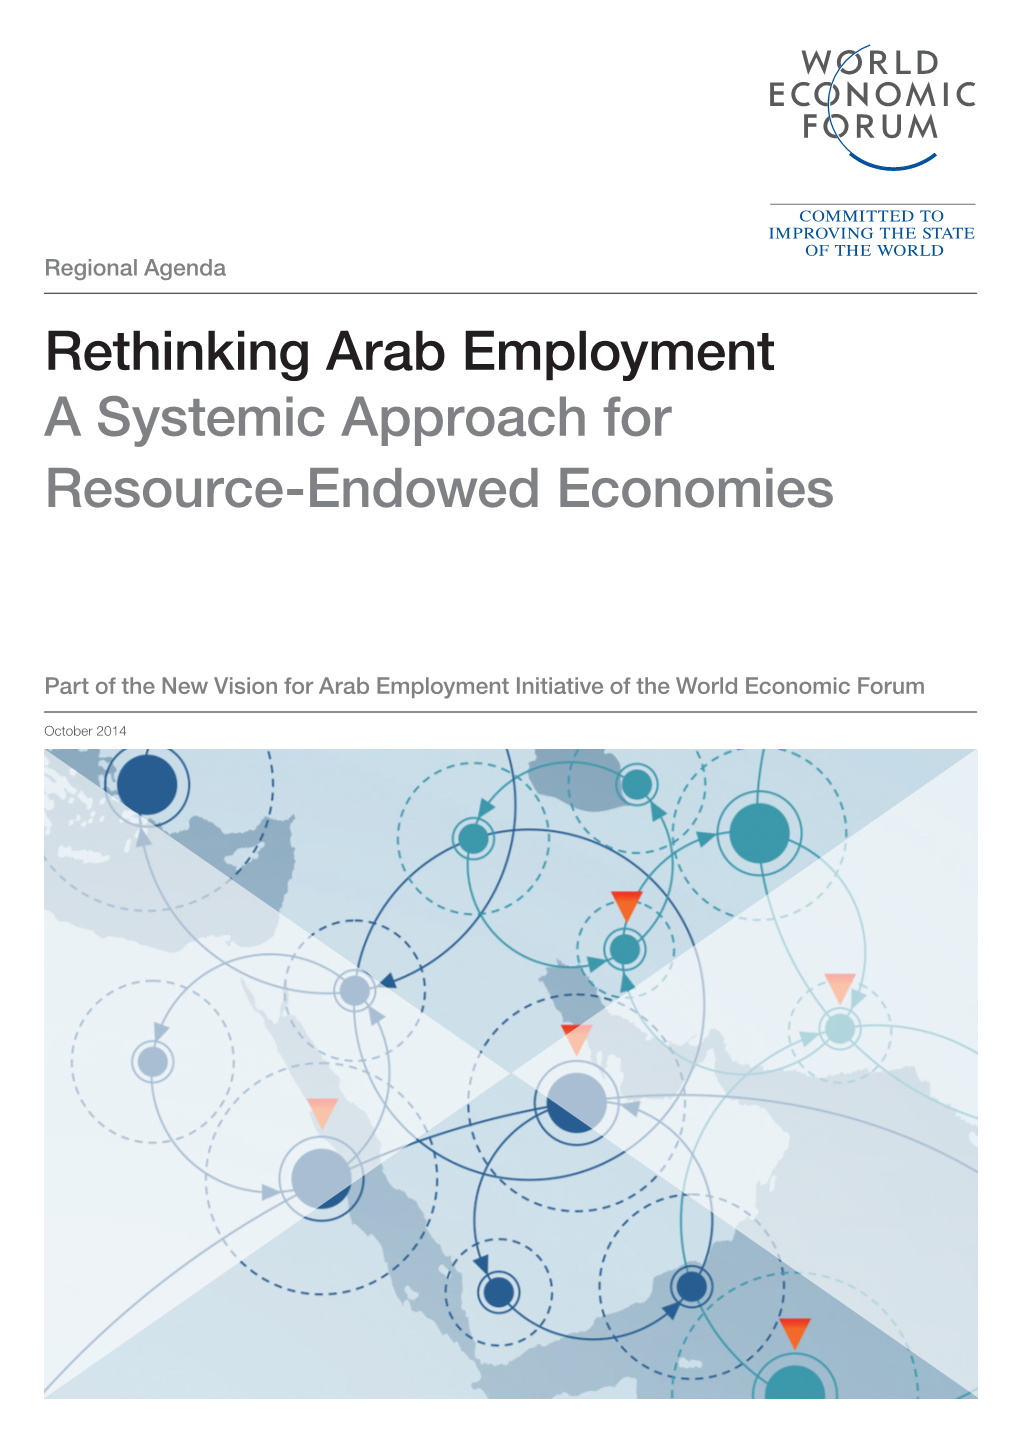 Rethinking Arab Employment a Systemic Approach for Resource-Endowed Economies